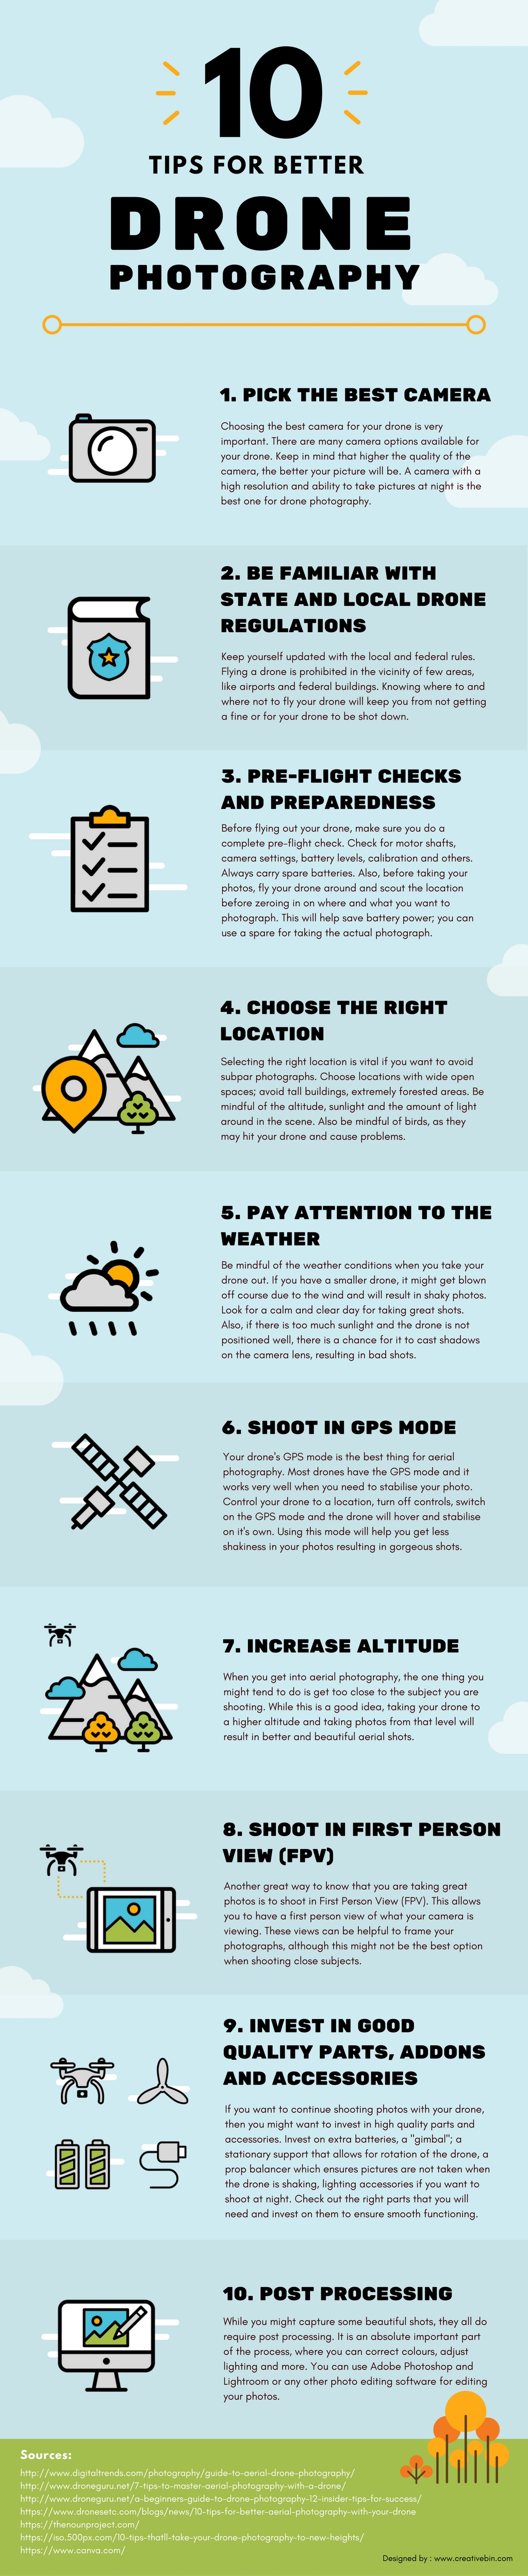 Drone Photography - Infographic